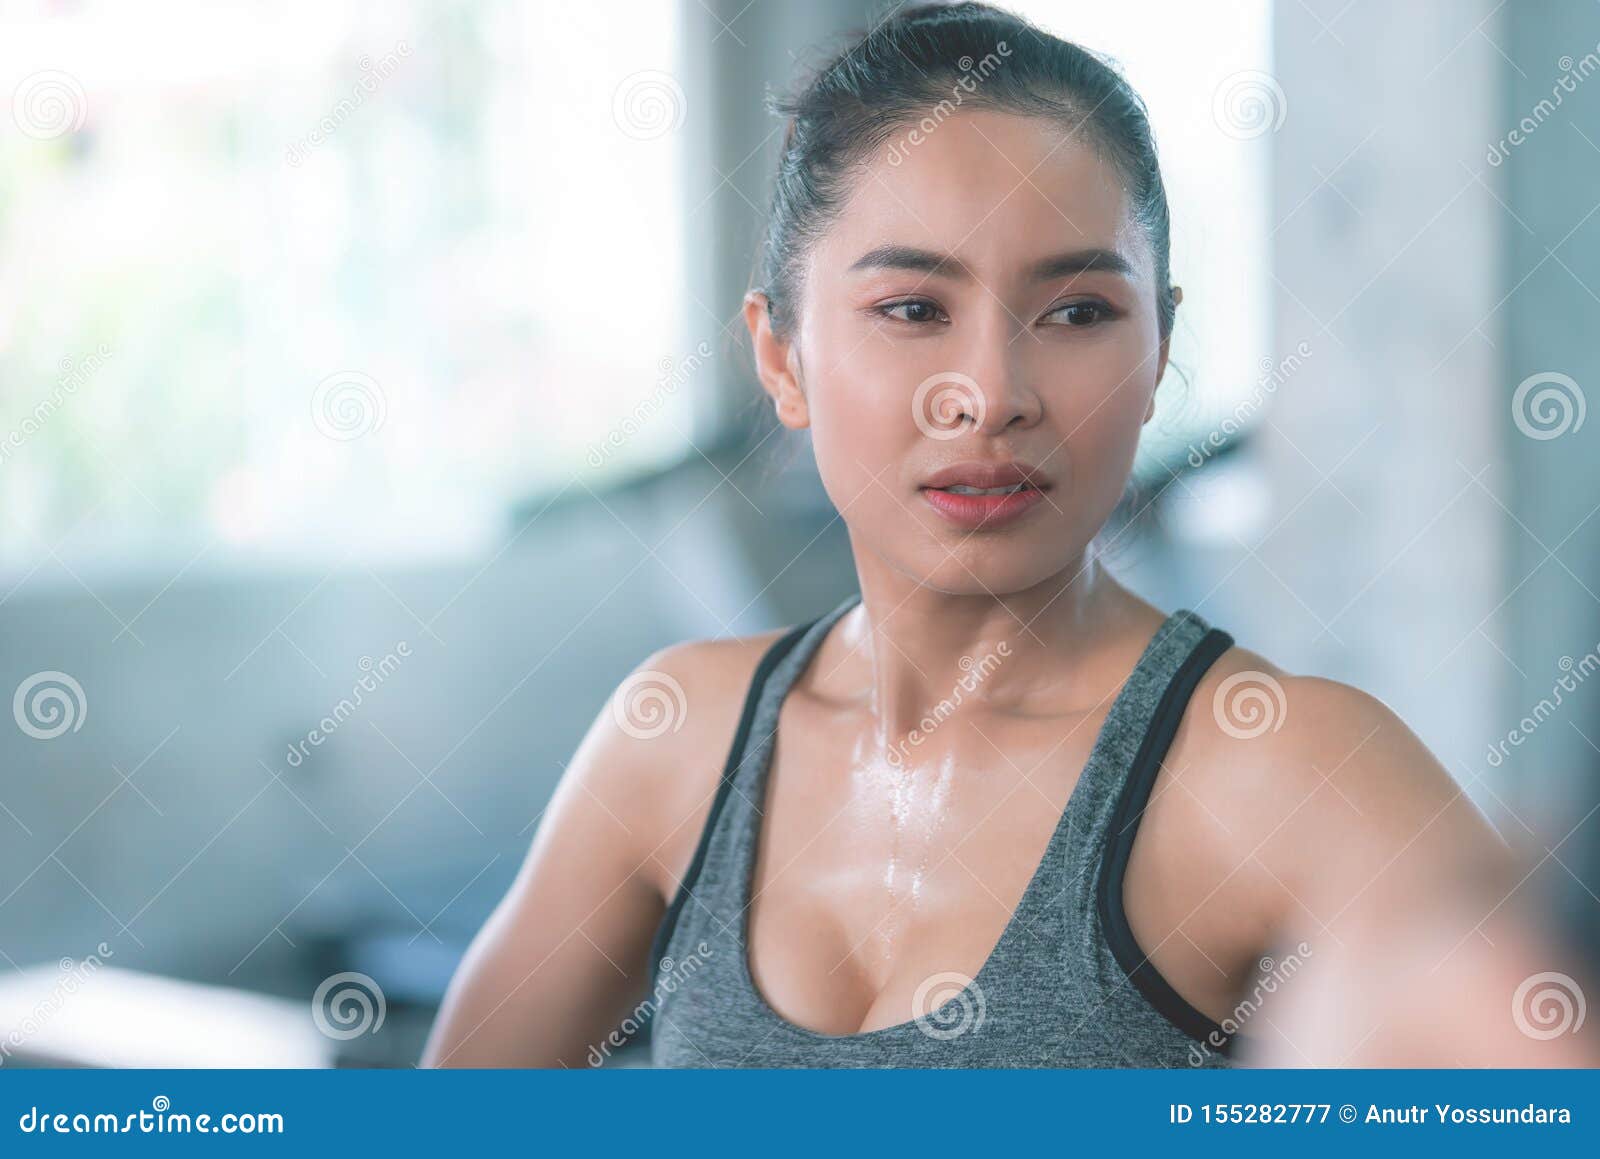 Healthy Woman Is Sweating While They Exercising In Fitness Gym Stock Image Image Of Health